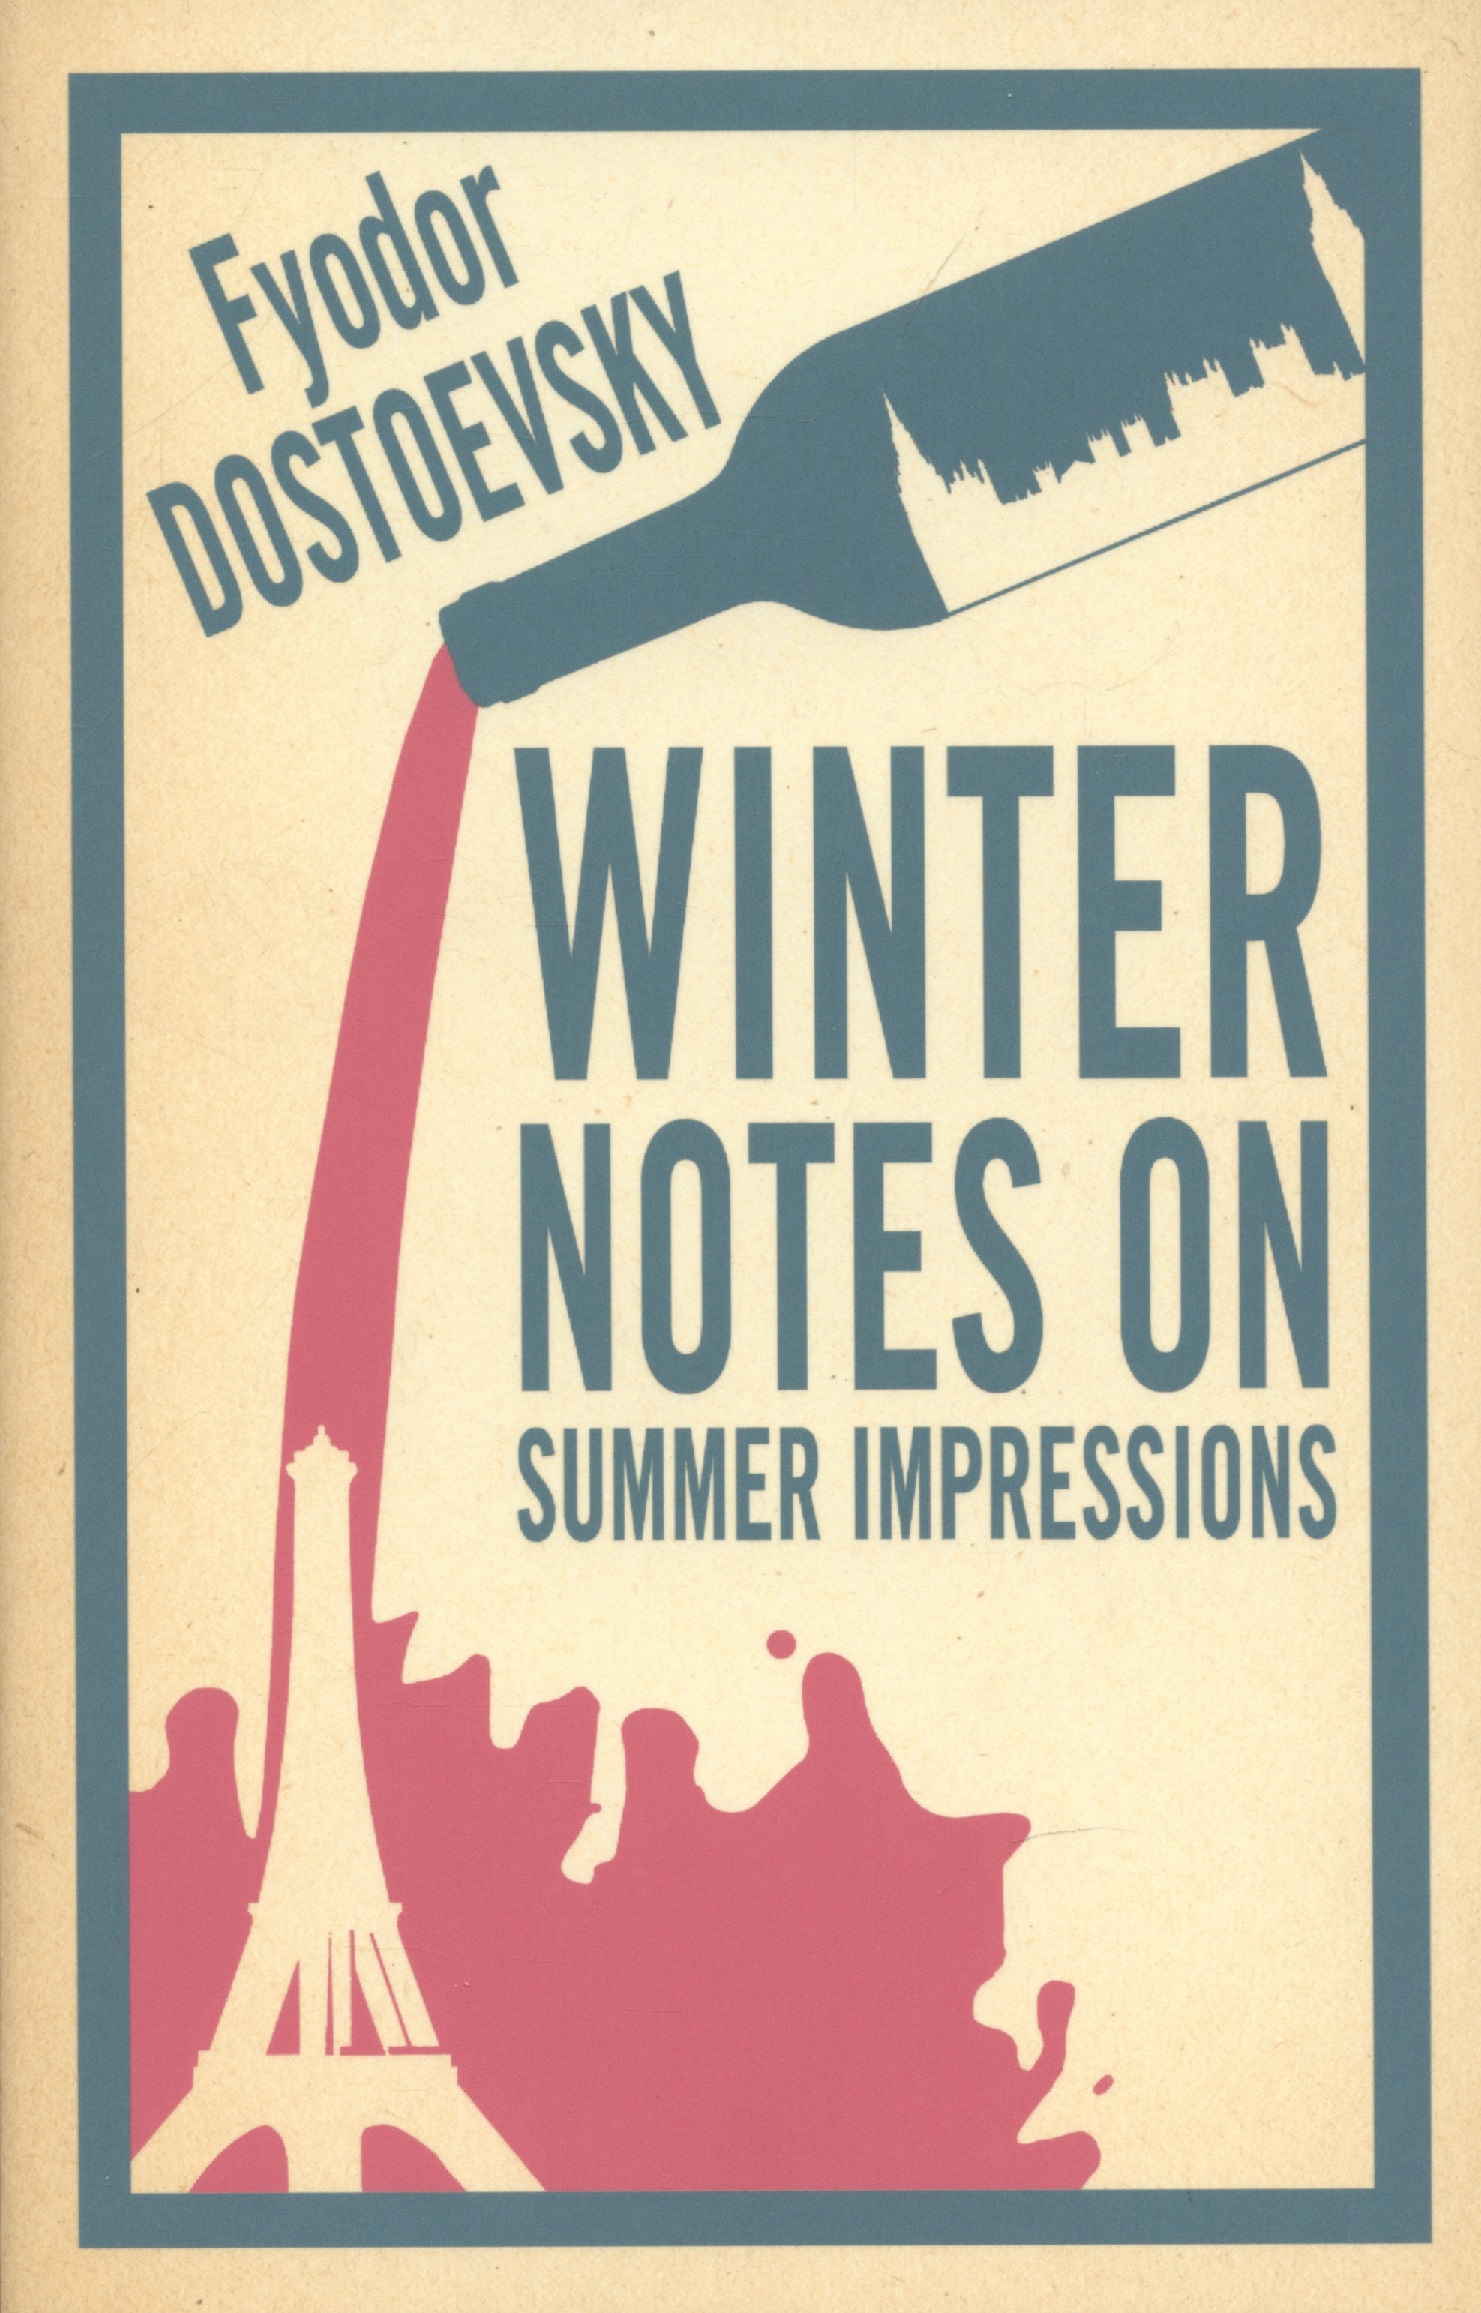 Winter Notes On Summer Impressions dostoevsky f winter notes on summer impressions